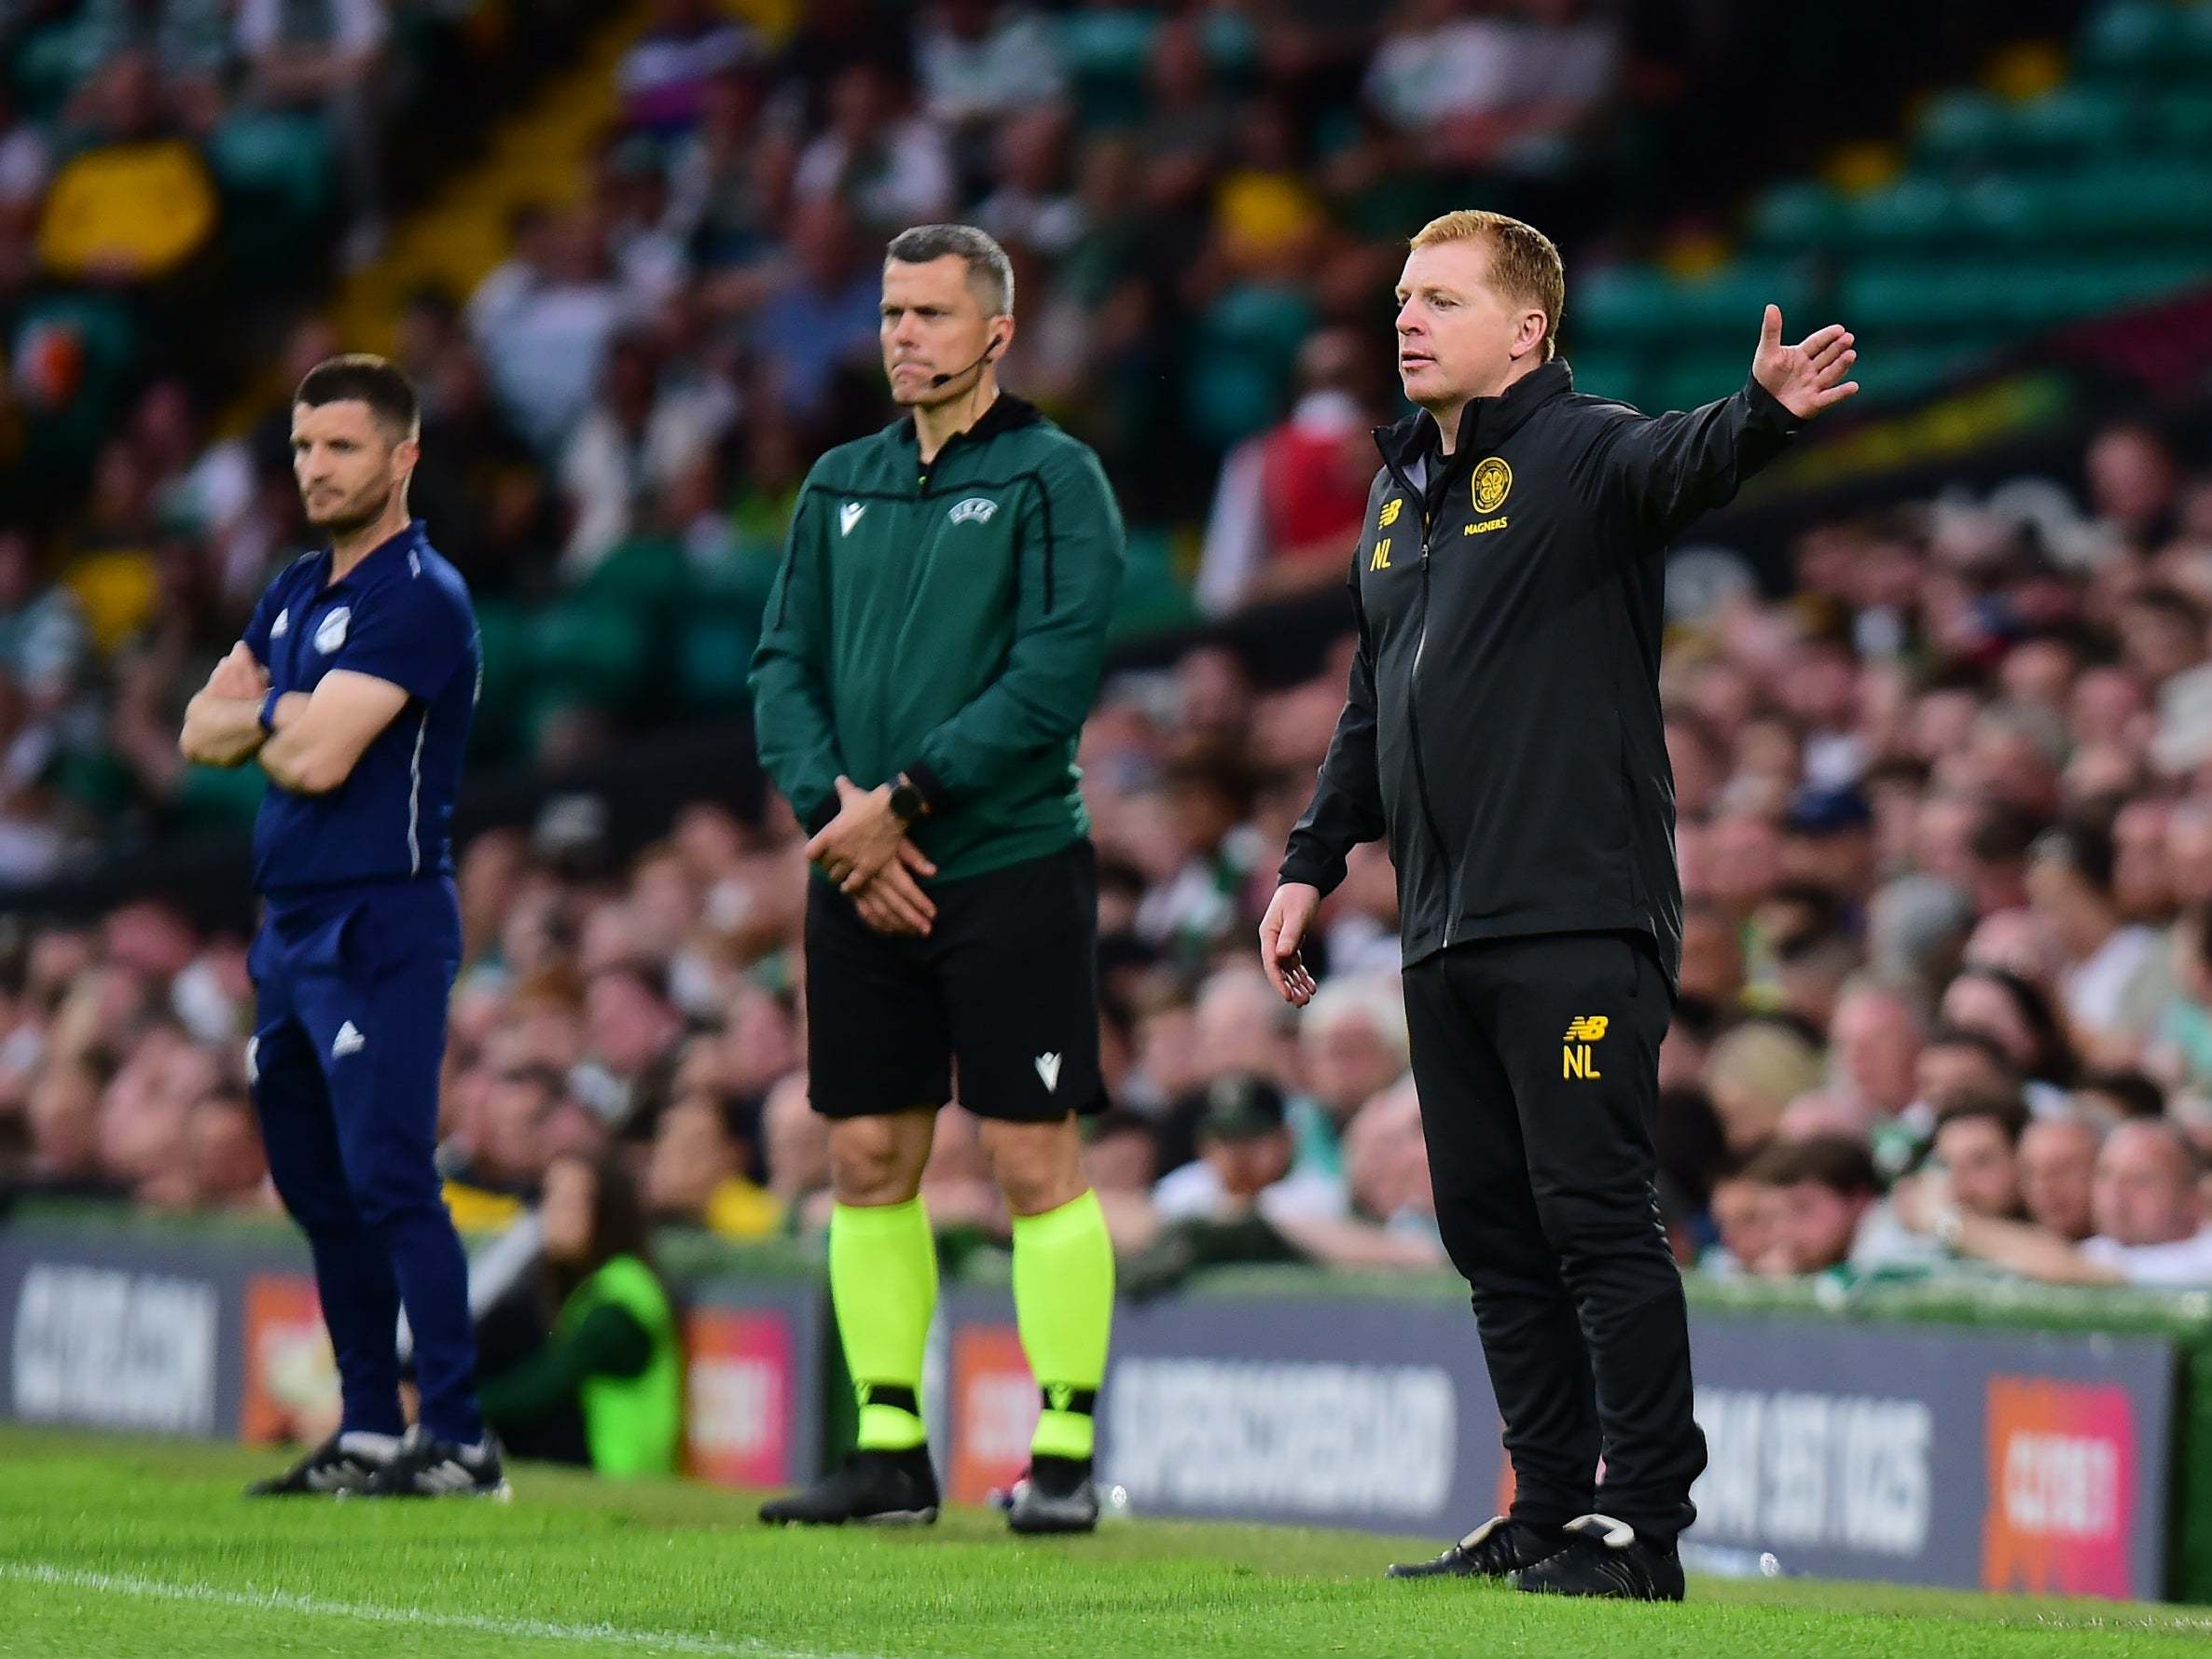 Celtic have a challenging route through the qualifying stage